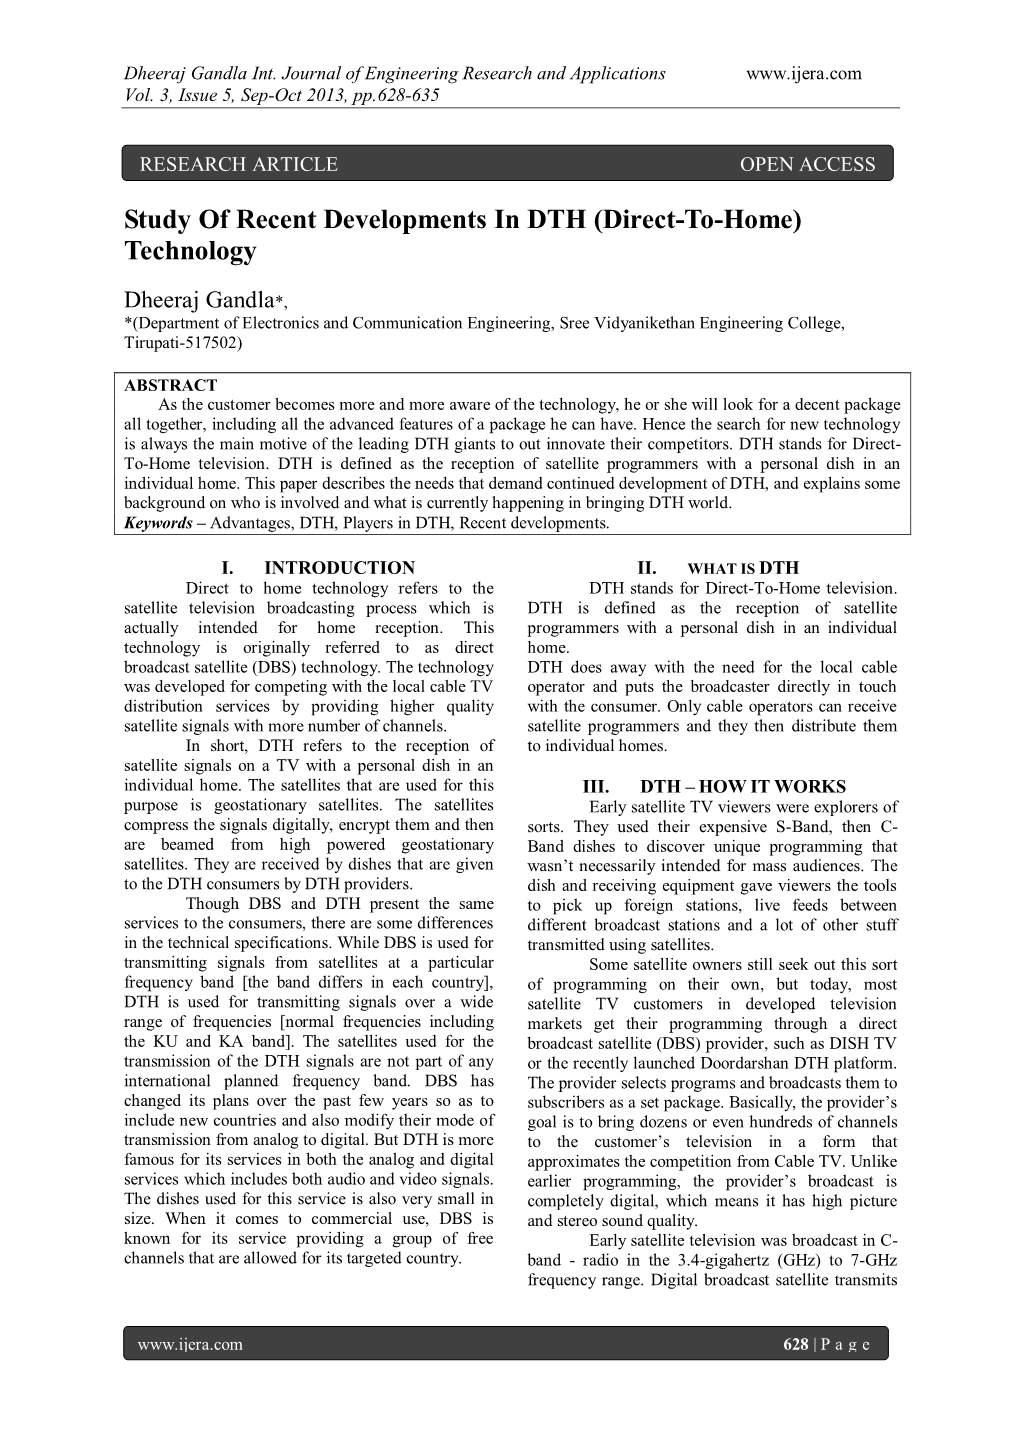 Study of Recent Developments in DTH (Direct-To-Home) Technology